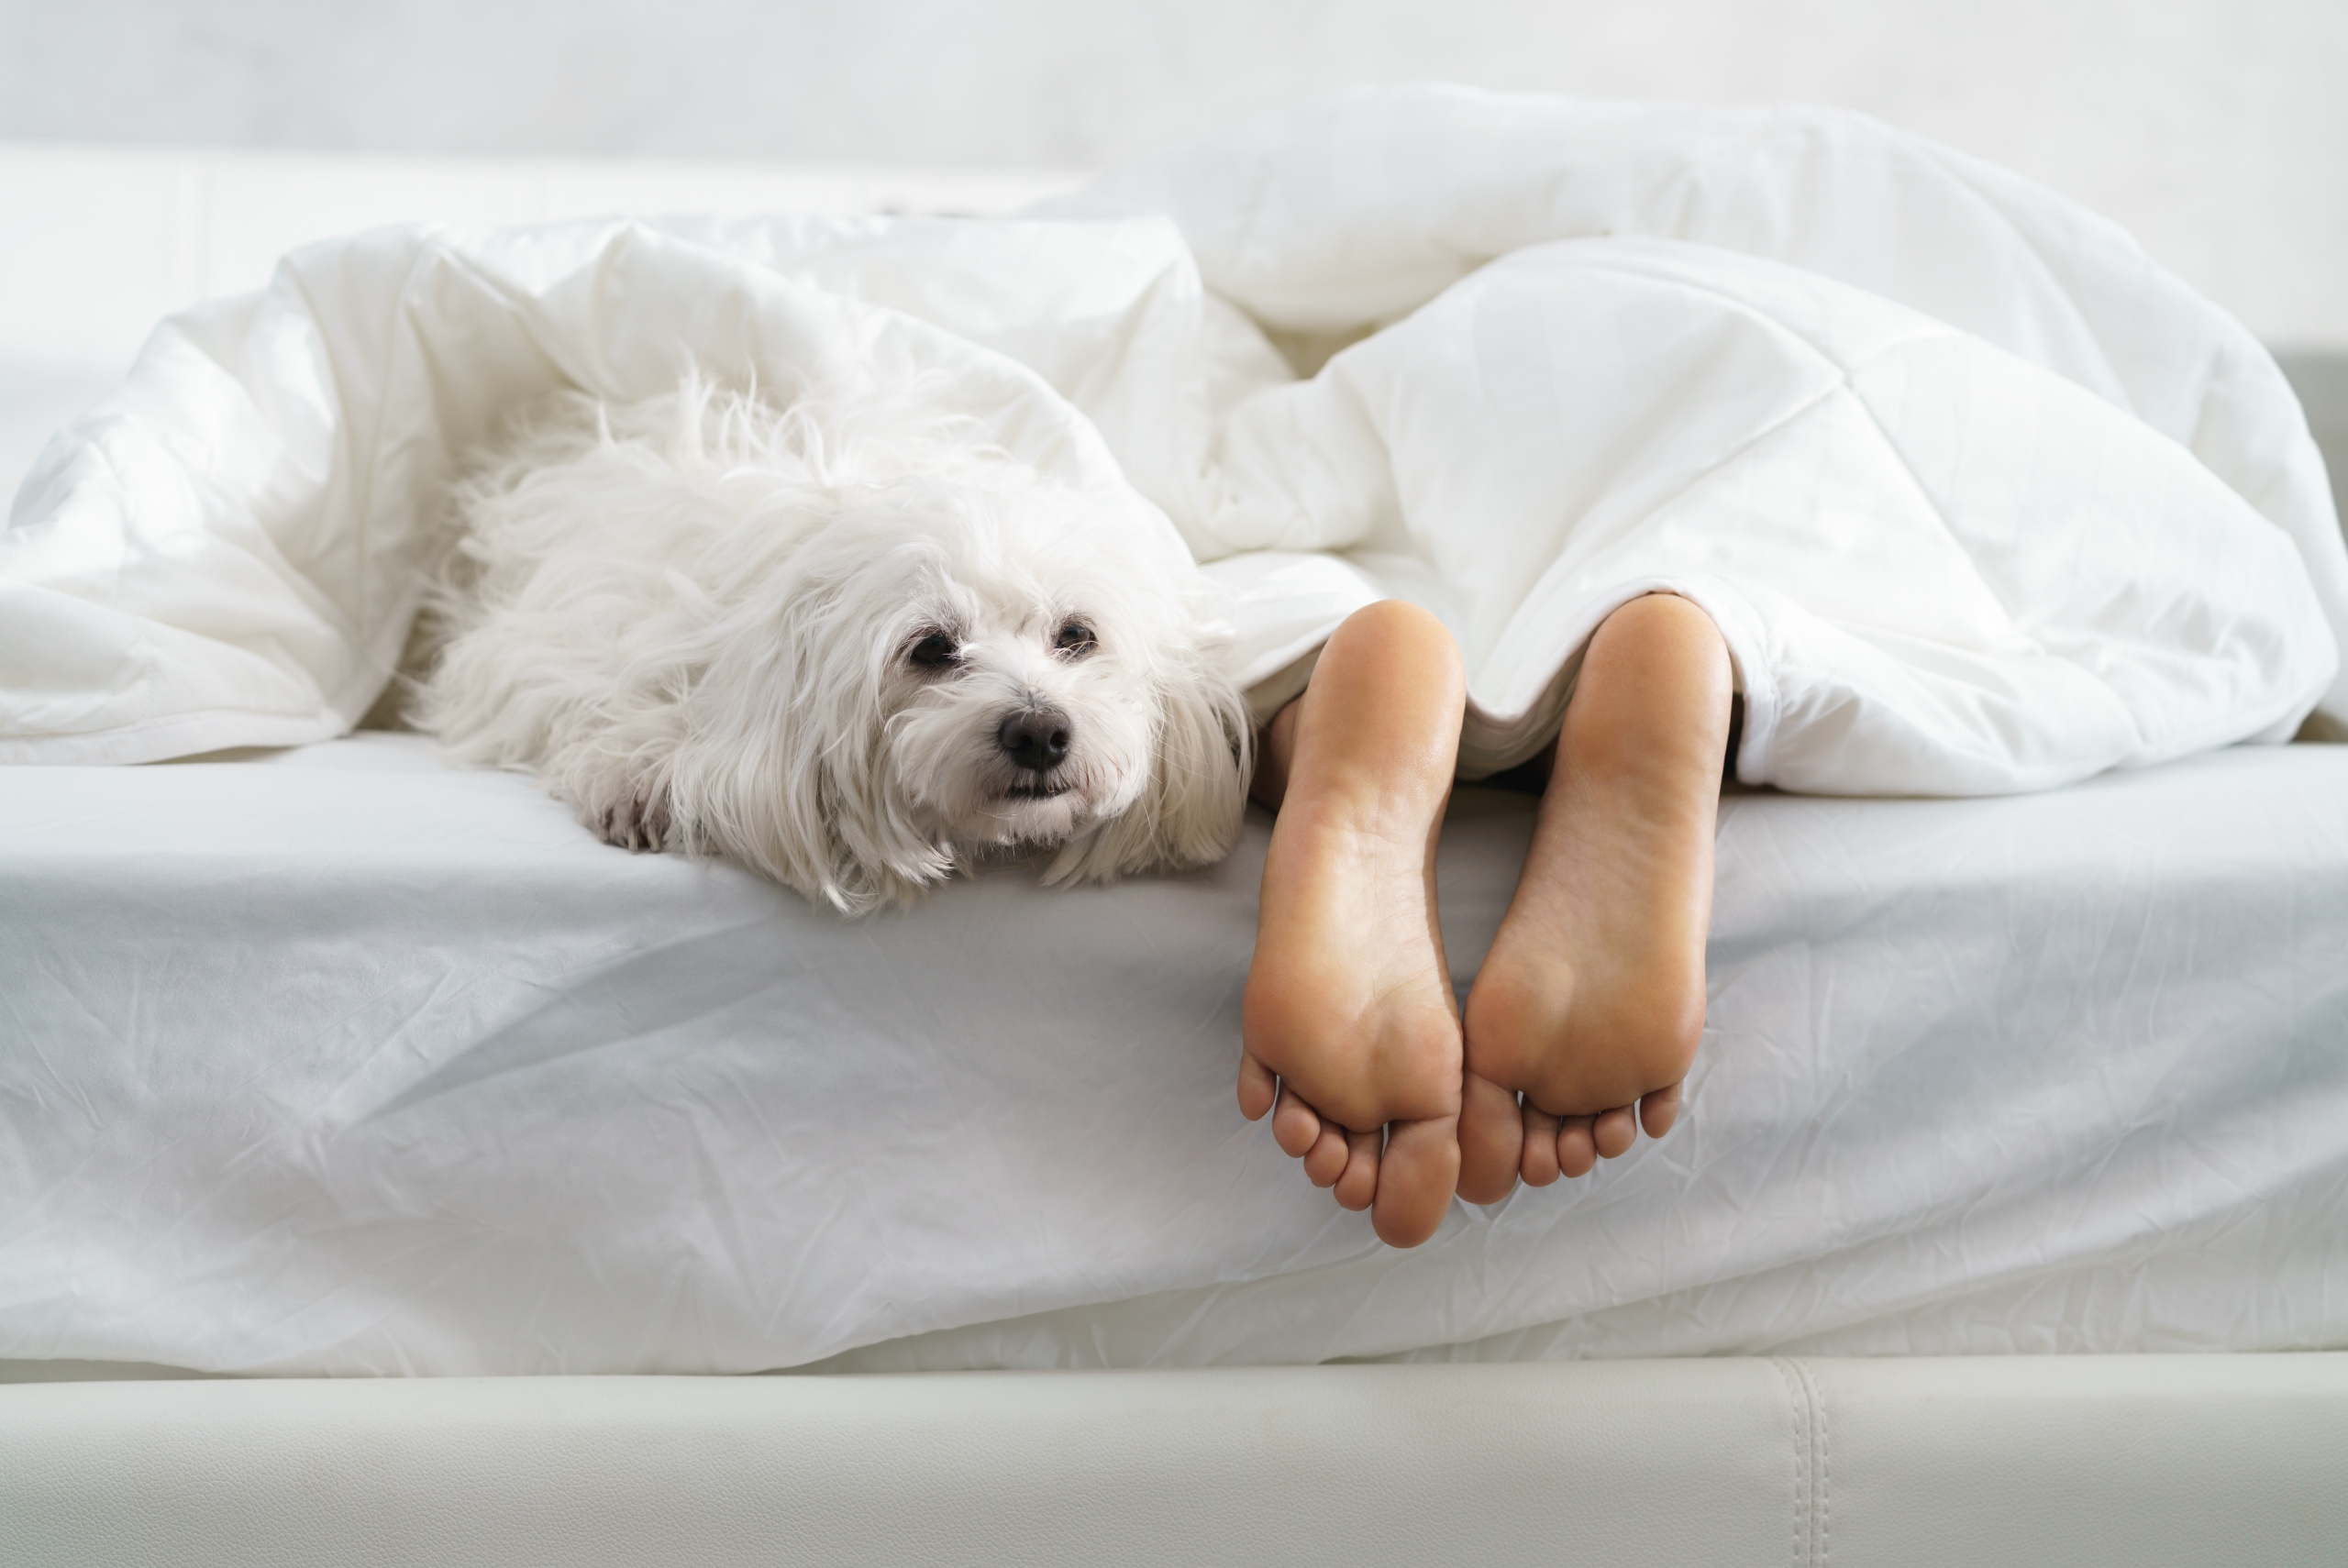 Woman's feet in bed next to dog